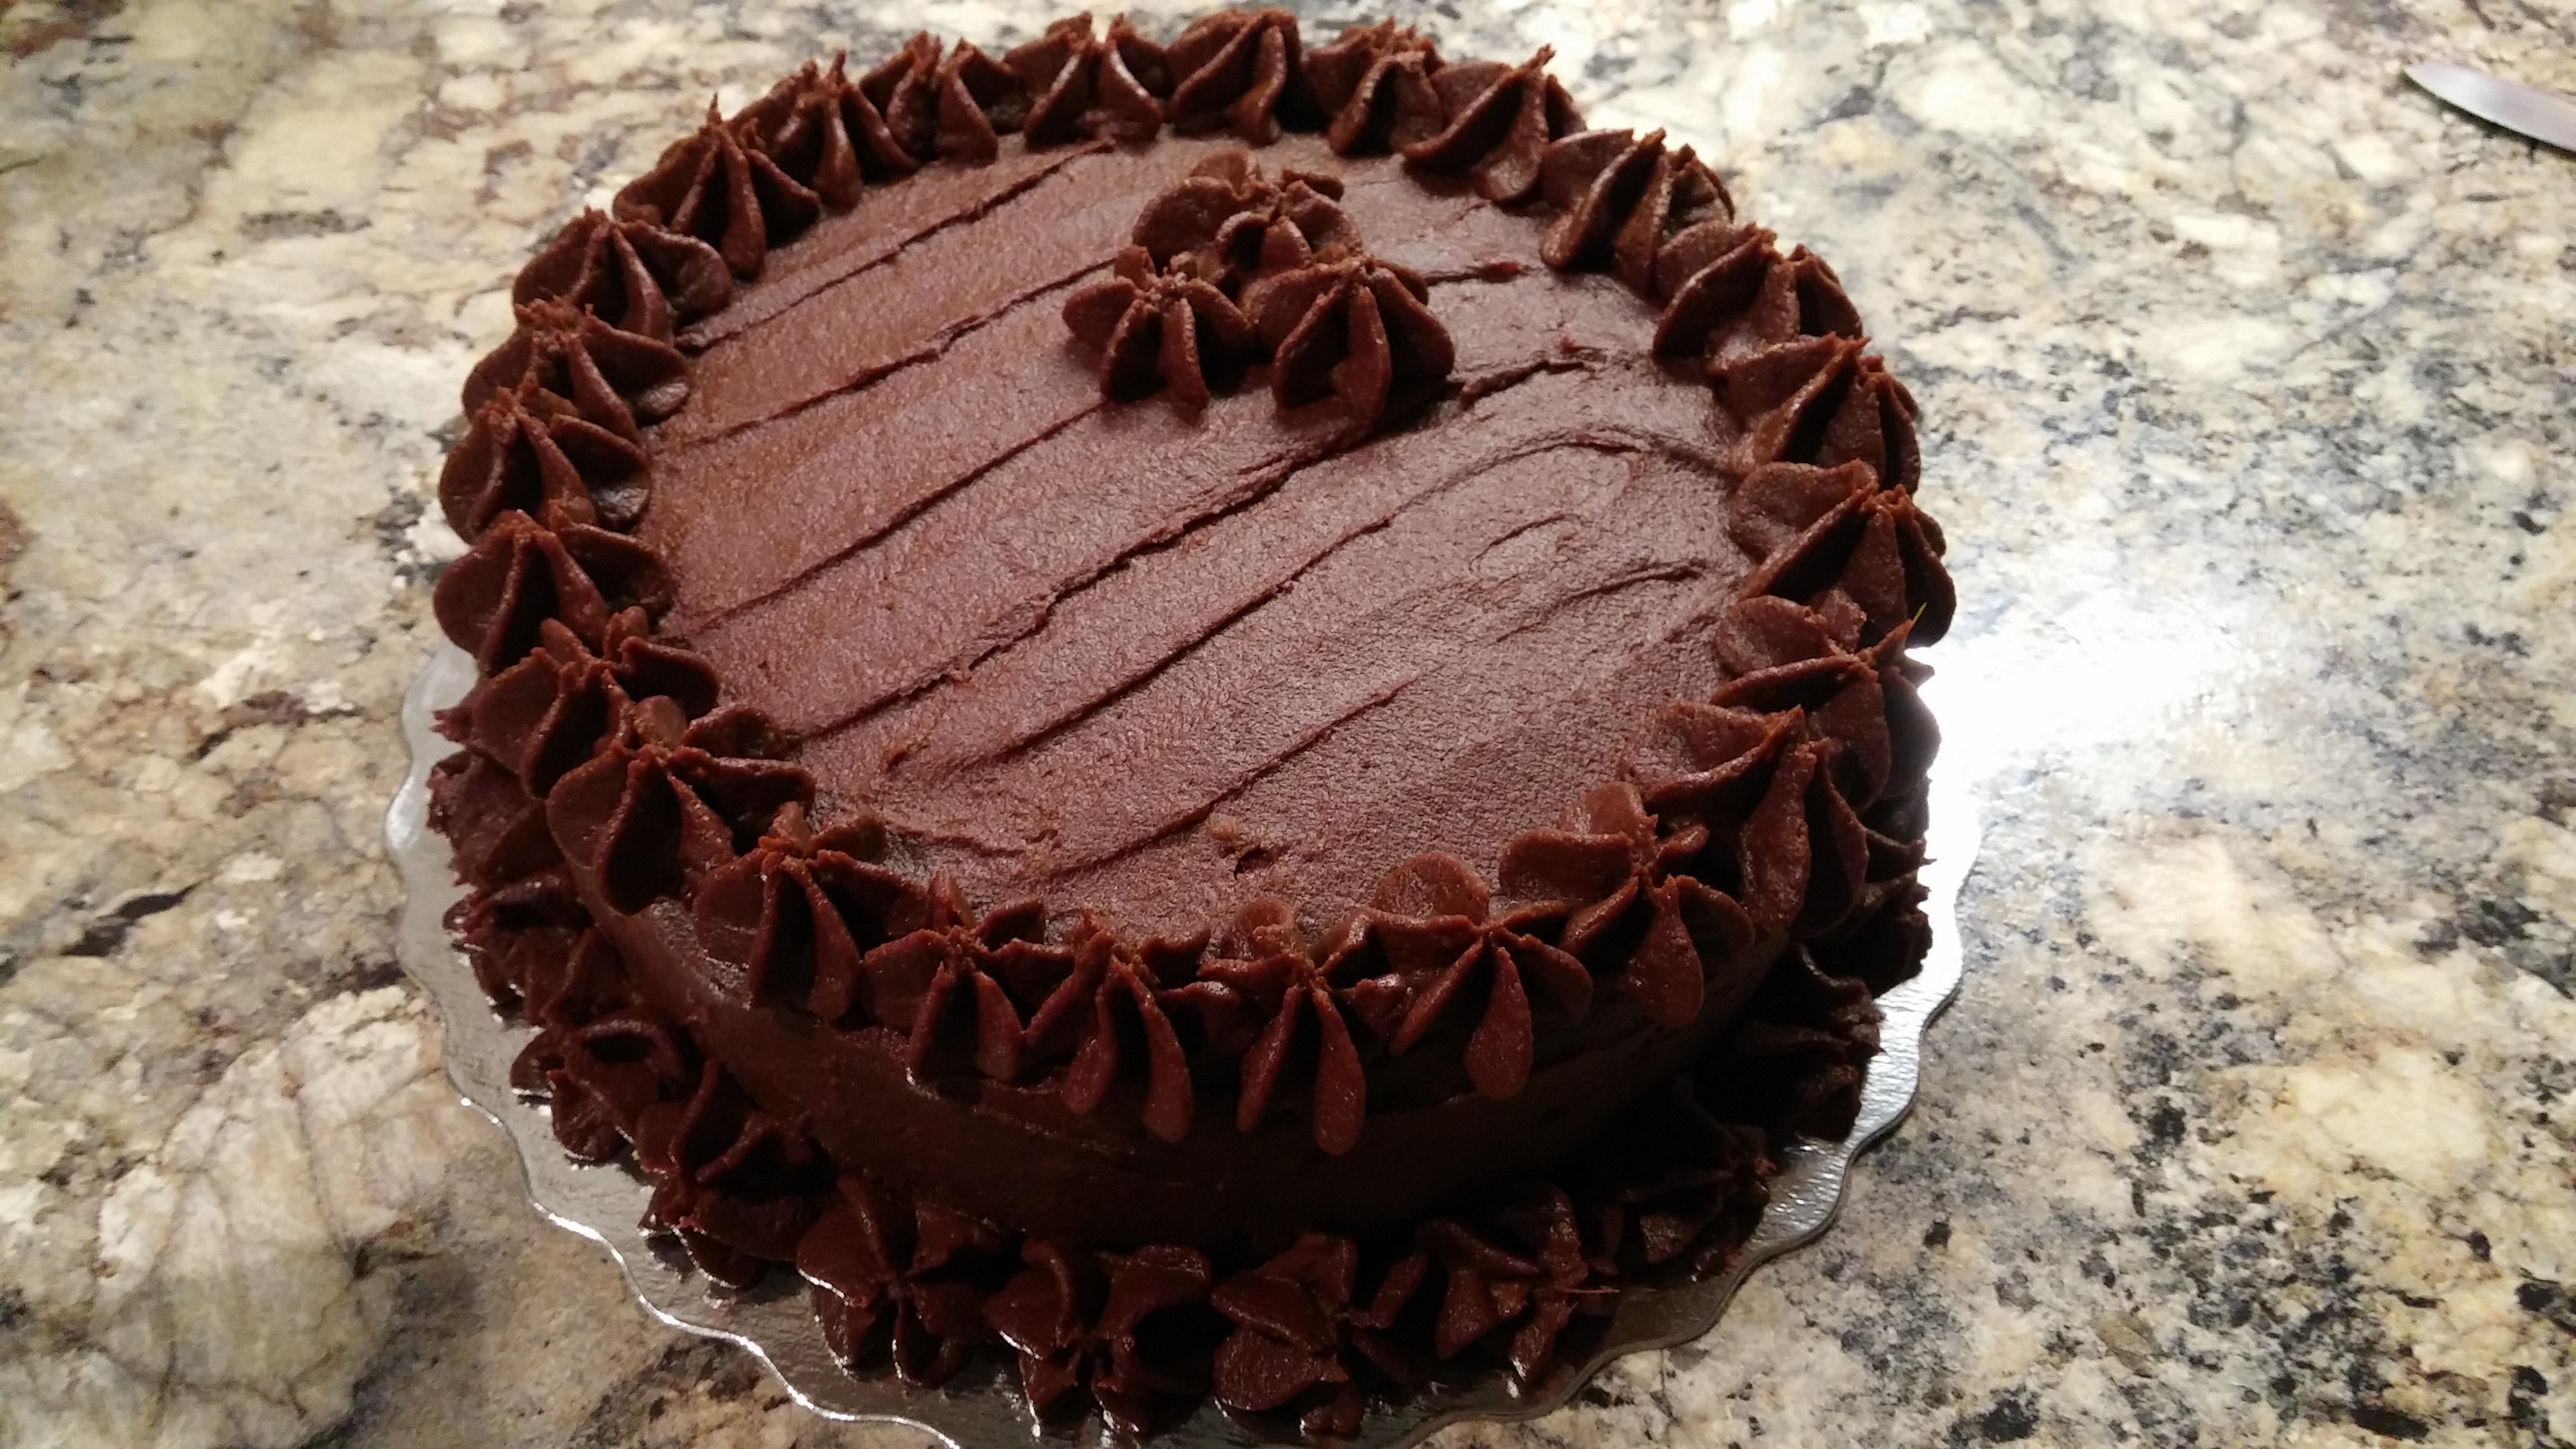 Chocolate cake with chocolate icing. 
Naturally Dairy free. 
Aslo available in glutne free and or vegan options (Non certified)